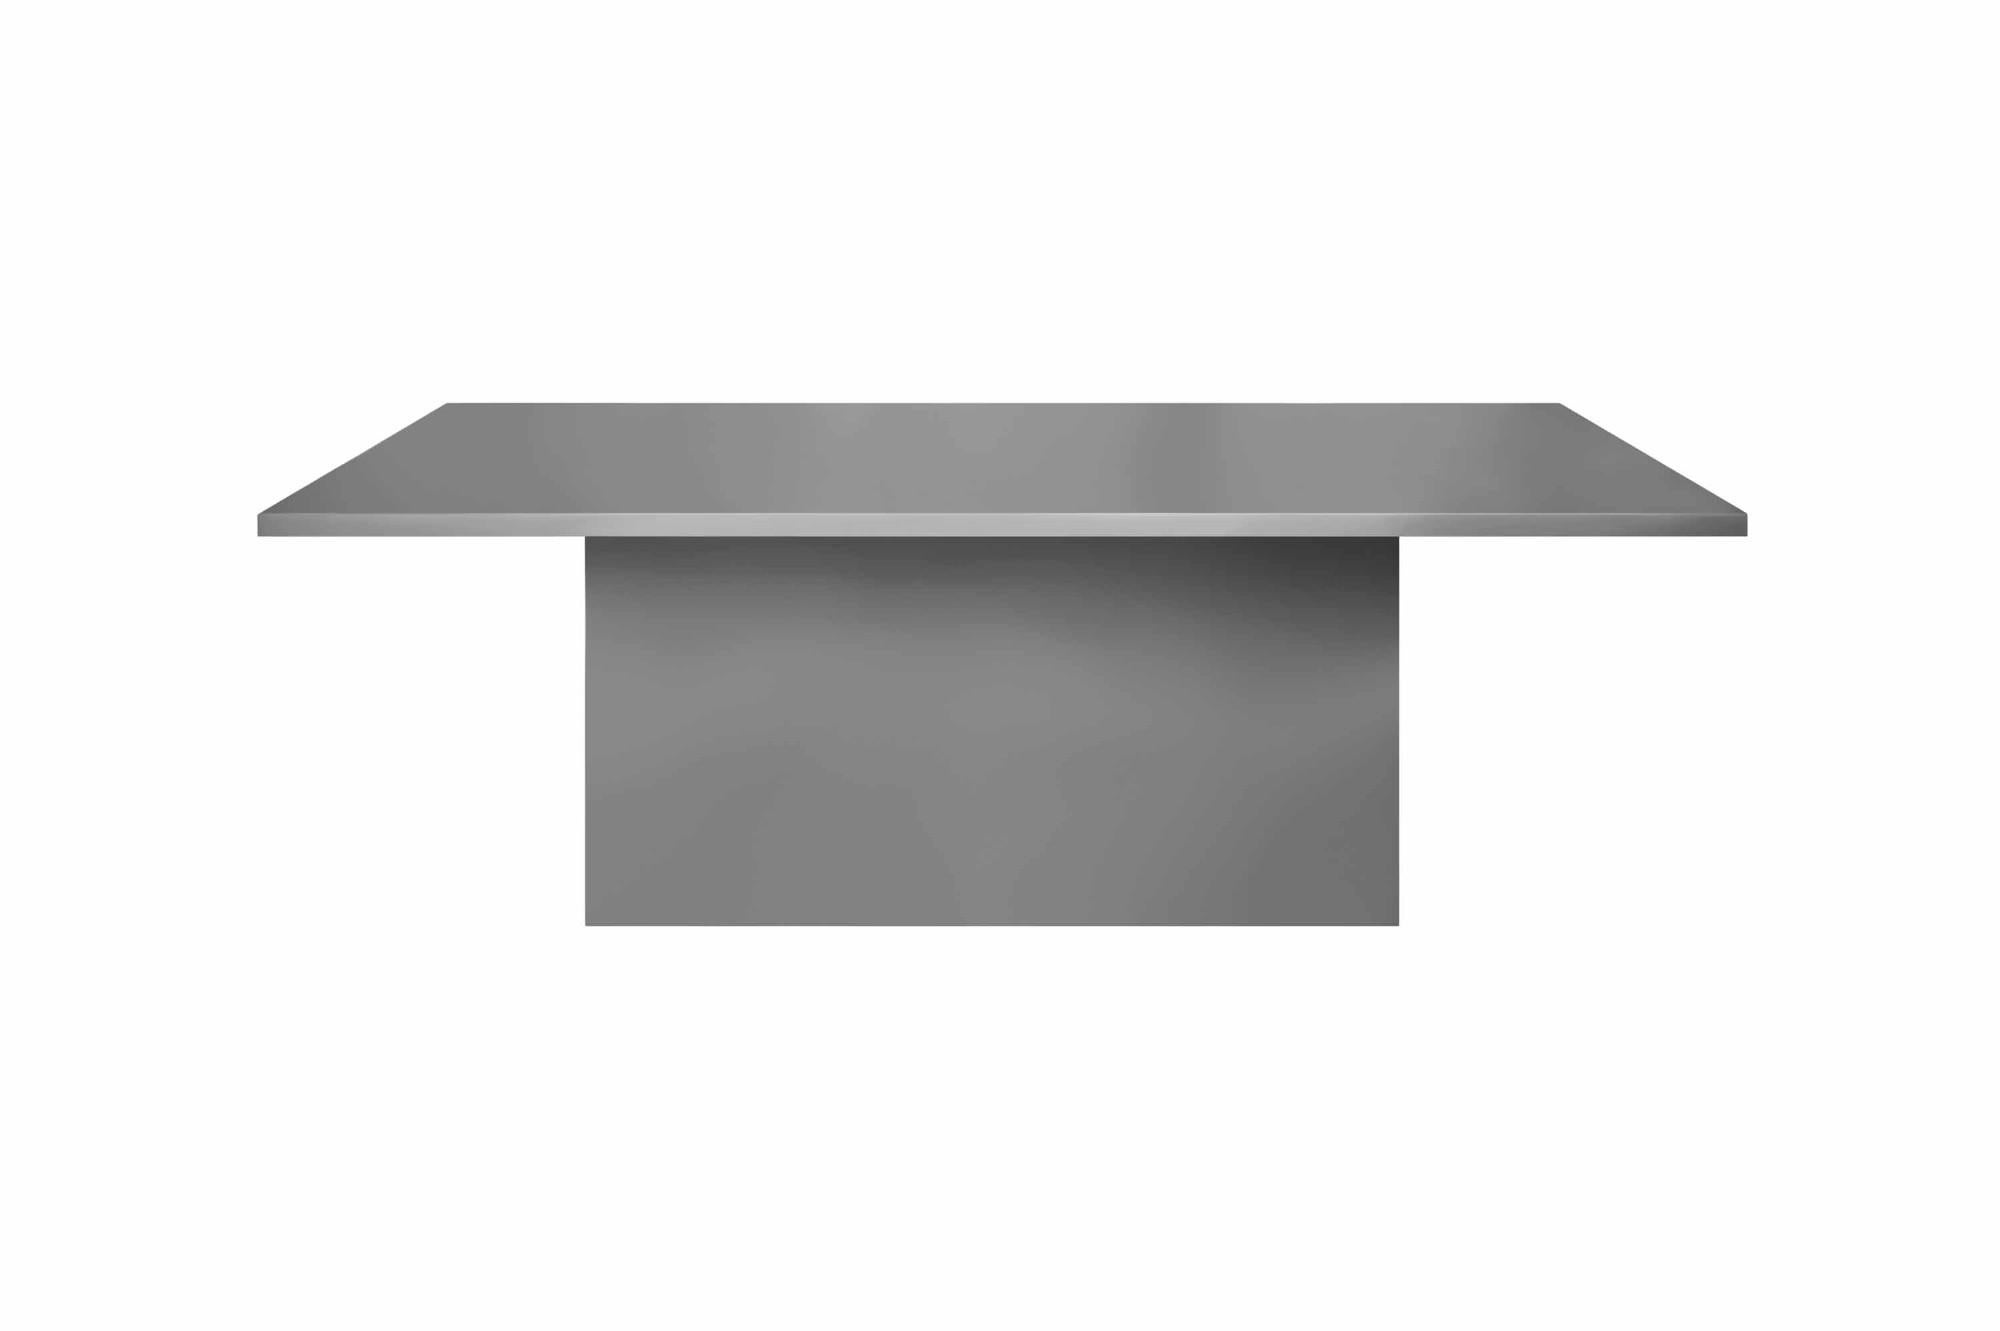 Handcrafted of reinforced resin and lacquered in grey matte. 
Unlike concrete, reinforced resin is forceful enough to withstand extreme weather conditions without cracking or changing color.
Dimensions (in): 78.7 x 47.2 x 29.5
Weight (lbs):